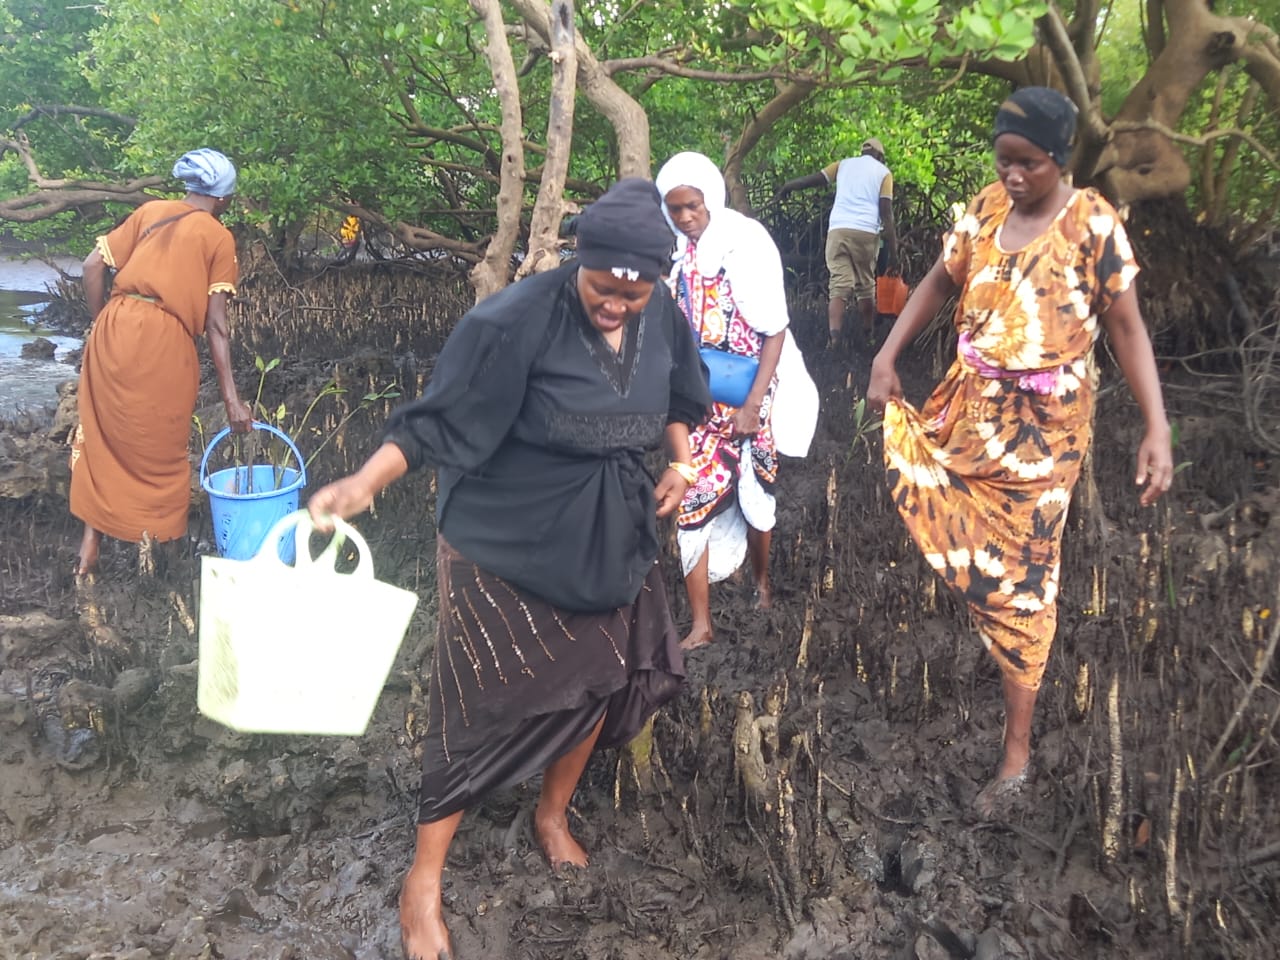 Women-led mangrove restoration project in Kwale transforms environment, lives